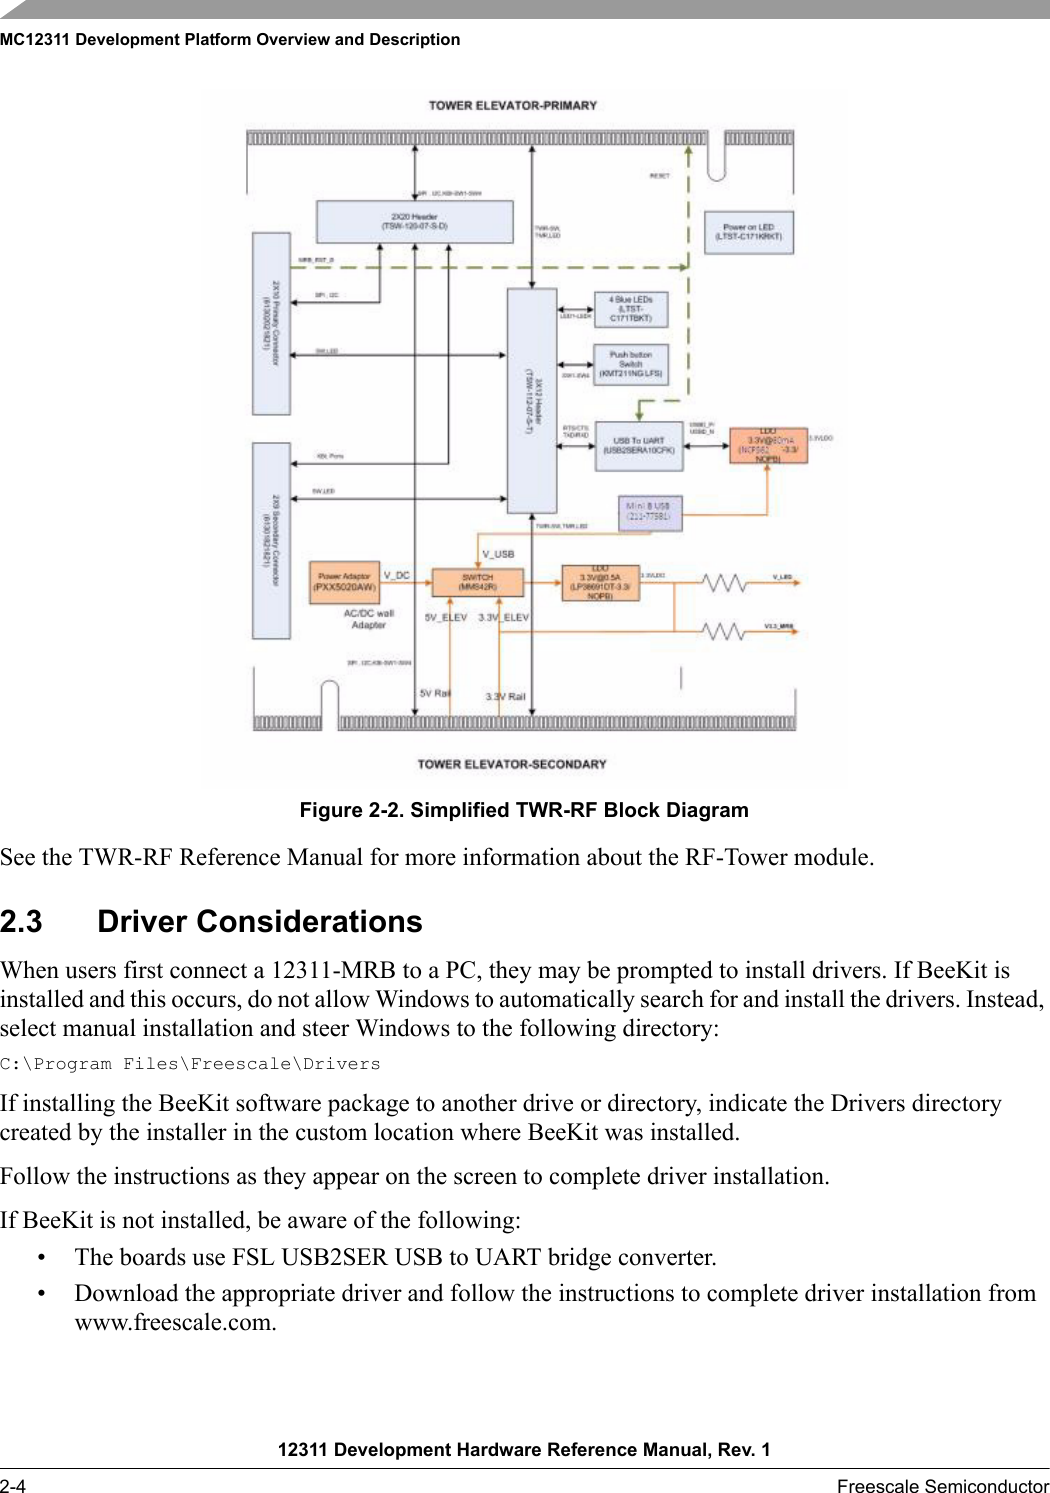 MC12311 Development Platform Overview and Description12311 Development Hardware Reference Manual, Rev. 12-4 Freescale SemiconductorFigure 2-2. Simplified TWR-RF Block DiagramSee the TWR-RF Reference Manual for more information about the RF-Tower module.2.3 Driver ConsiderationsWhen users first connect a 12311-MRB to a PC, they may be prompted to install drivers. If BeeKit is installed and this occurs, do not allow Windows to automatically search for and install the drivers. Instead, select manual installation and steer Windows to the following directory:C:\Program Files\Freescale\DriversIf installing the BeeKit software package to another drive or directory, indicate the Drivers directory created by the installer in the custom location where BeeKit was installed.Follow the instructions as they appear on the screen to complete driver installation.If BeeKit is not installed, be aware of the following:• The boards use FSL USB2SER USB to UART bridge converter.• Download the appropriate driver and follow the instructions to complete driver installation from www.freescale.com.